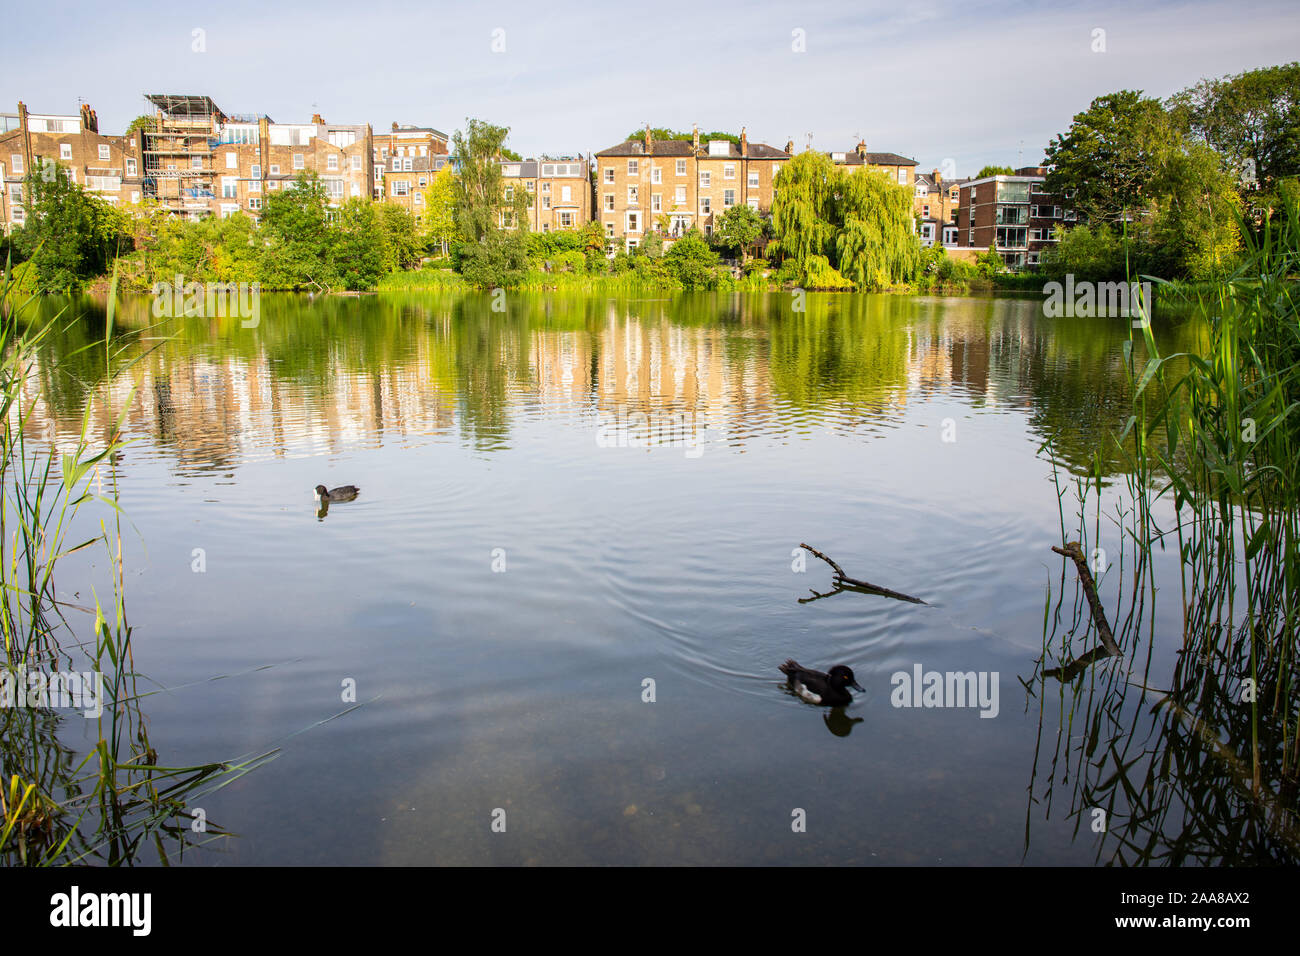 London, England, UK - July 4, 2019: Townhouses and trees are reflected in Hampstead No 2 Pond on London's Hampstead Heath park. Stock Photo